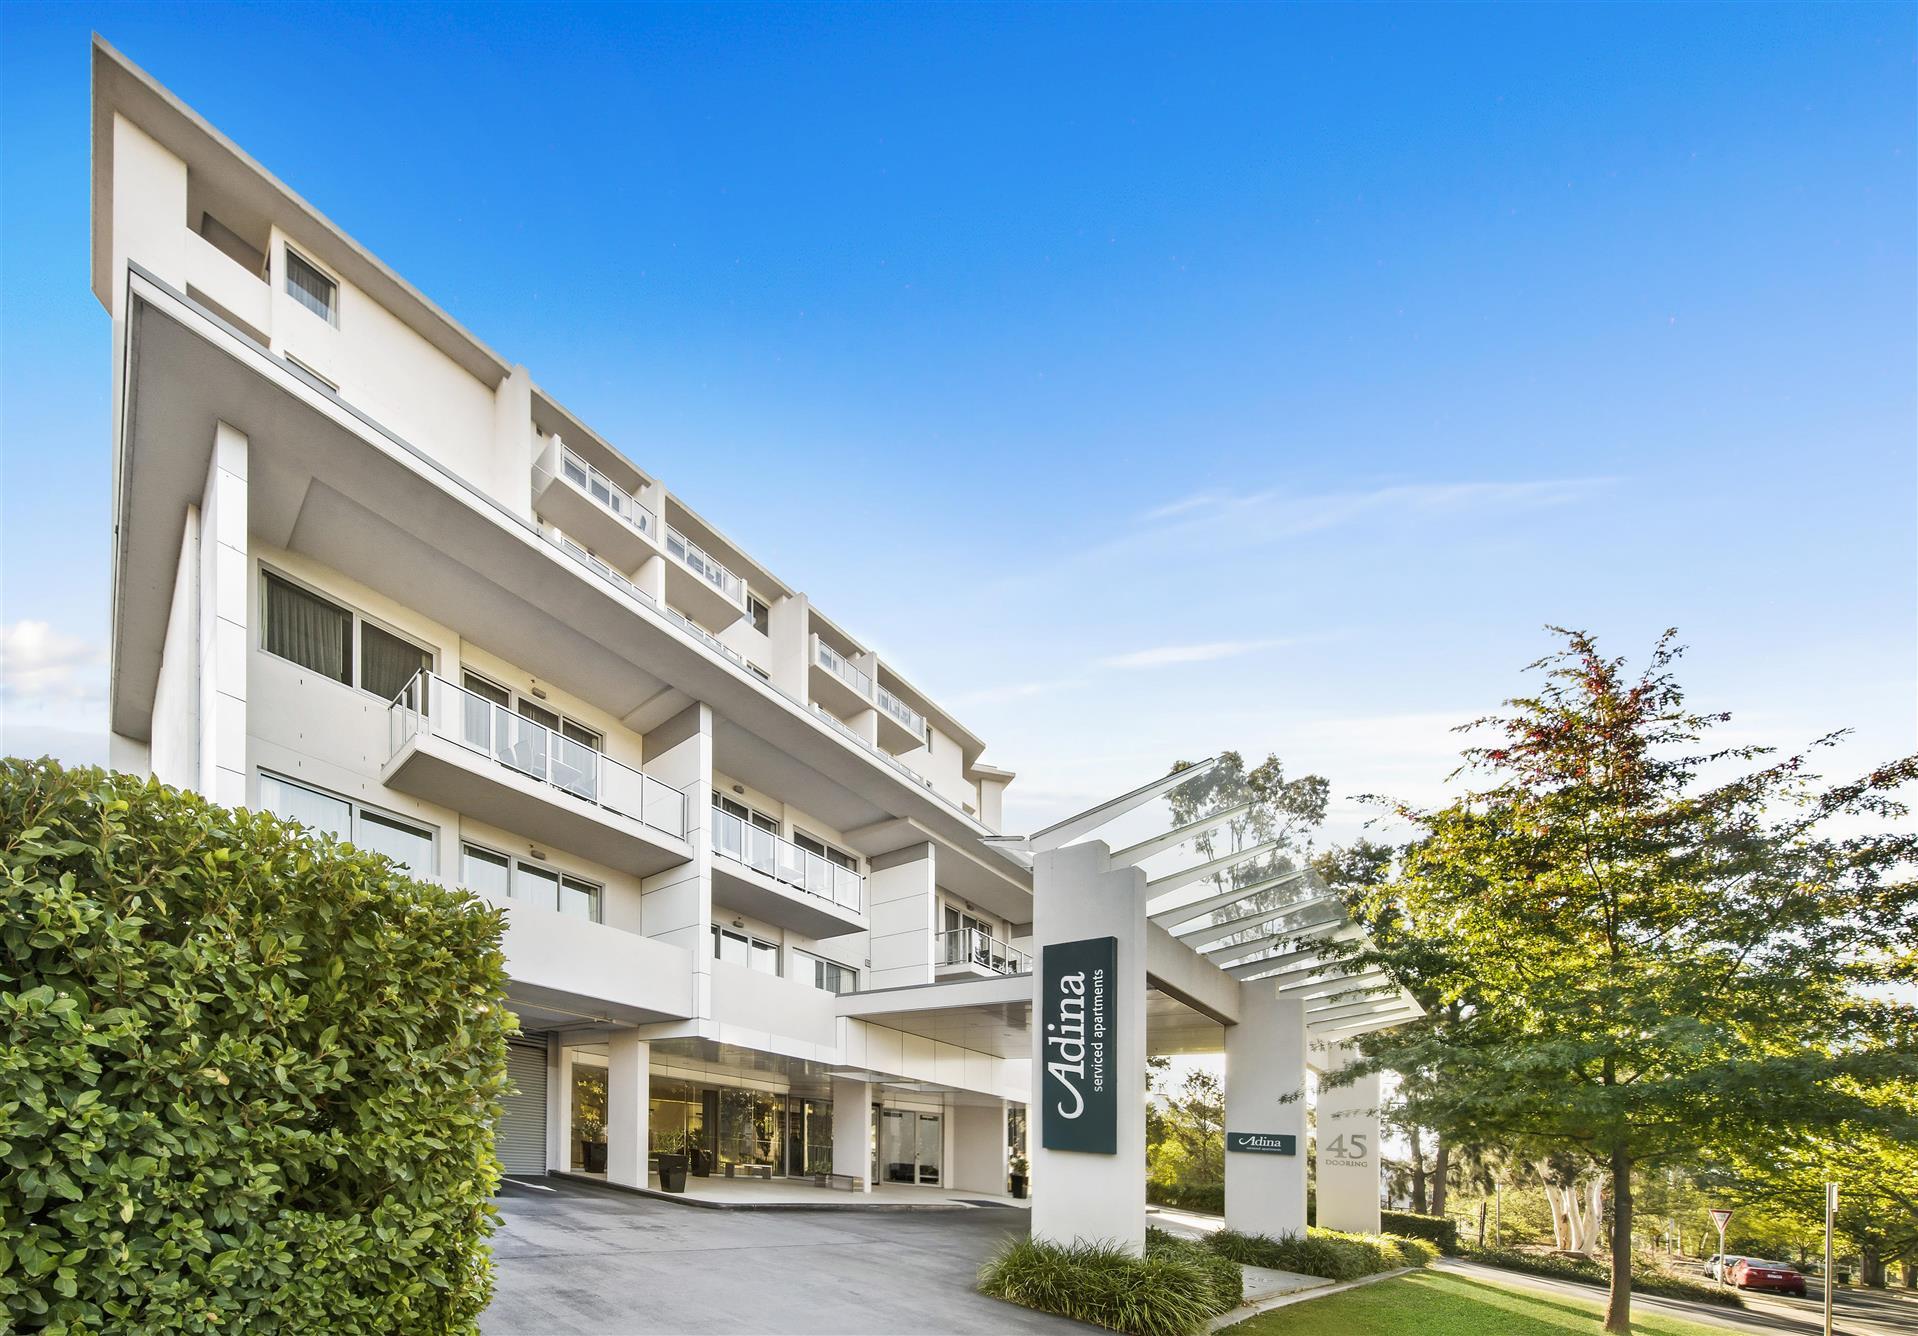 Adina Serviced Apartments Canberra Dickson in Canberra City, AU